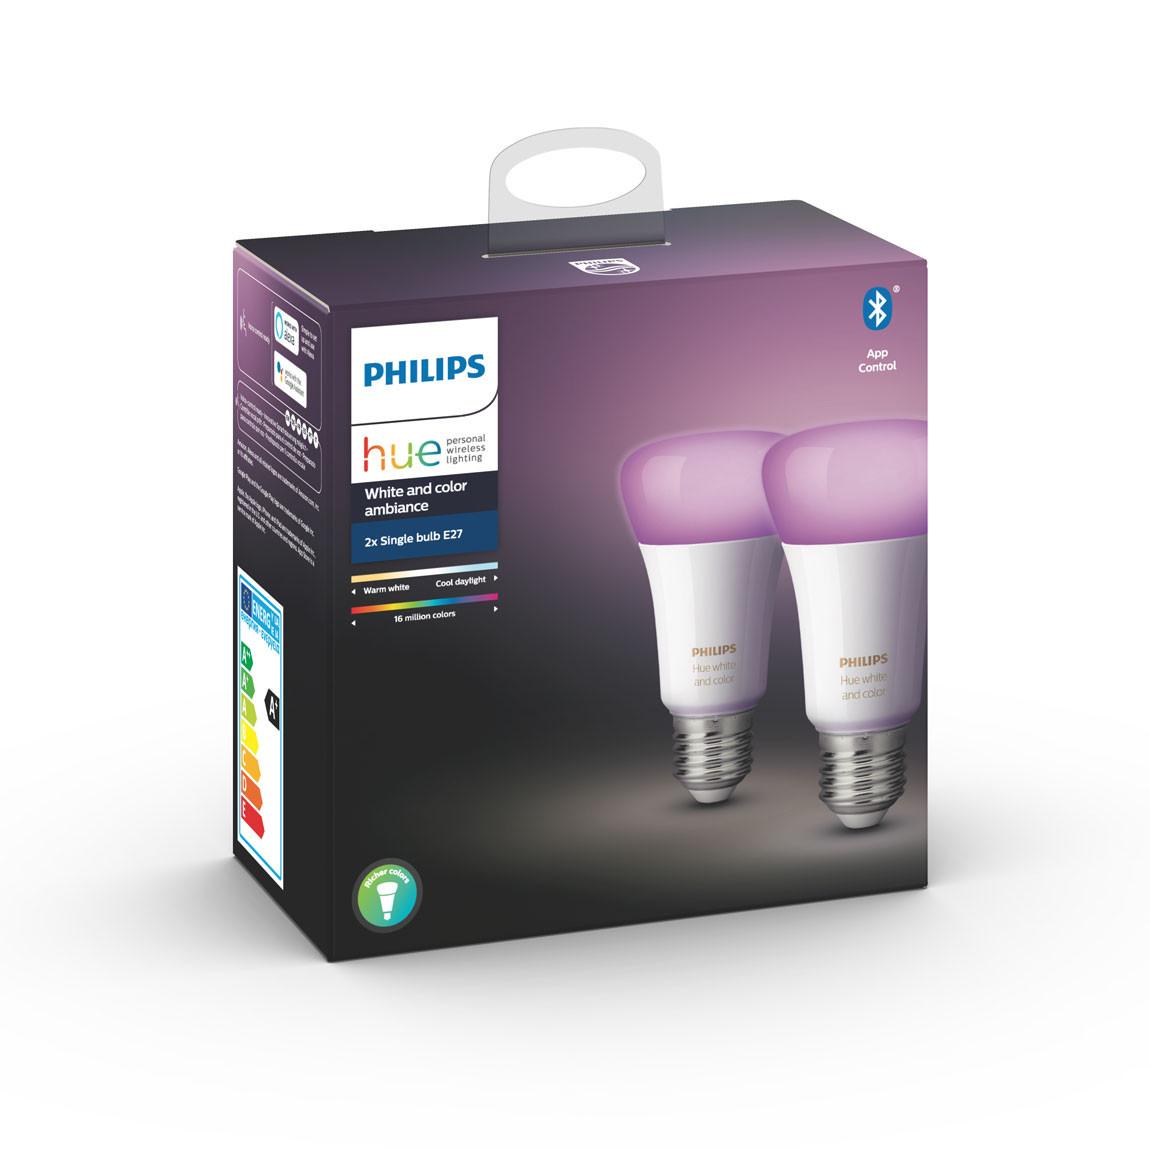 Philips Hue White & Color Ambiance E27 Bluetooth 10er-Set_Verpackung